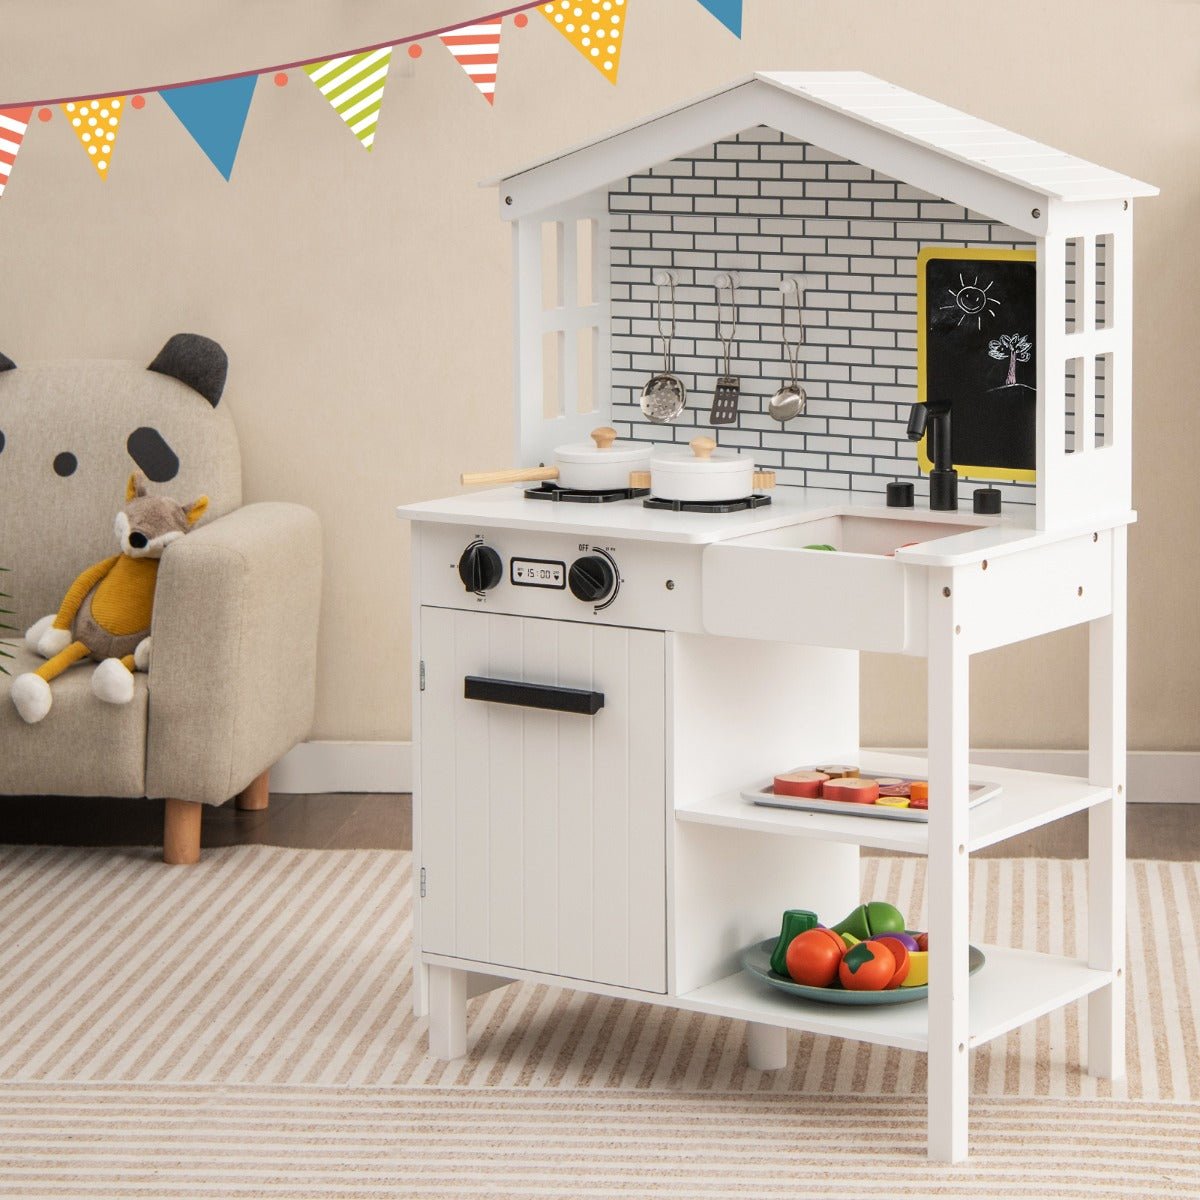 Get Creative with the Farmhouse Wooden Play Kitchen Toy